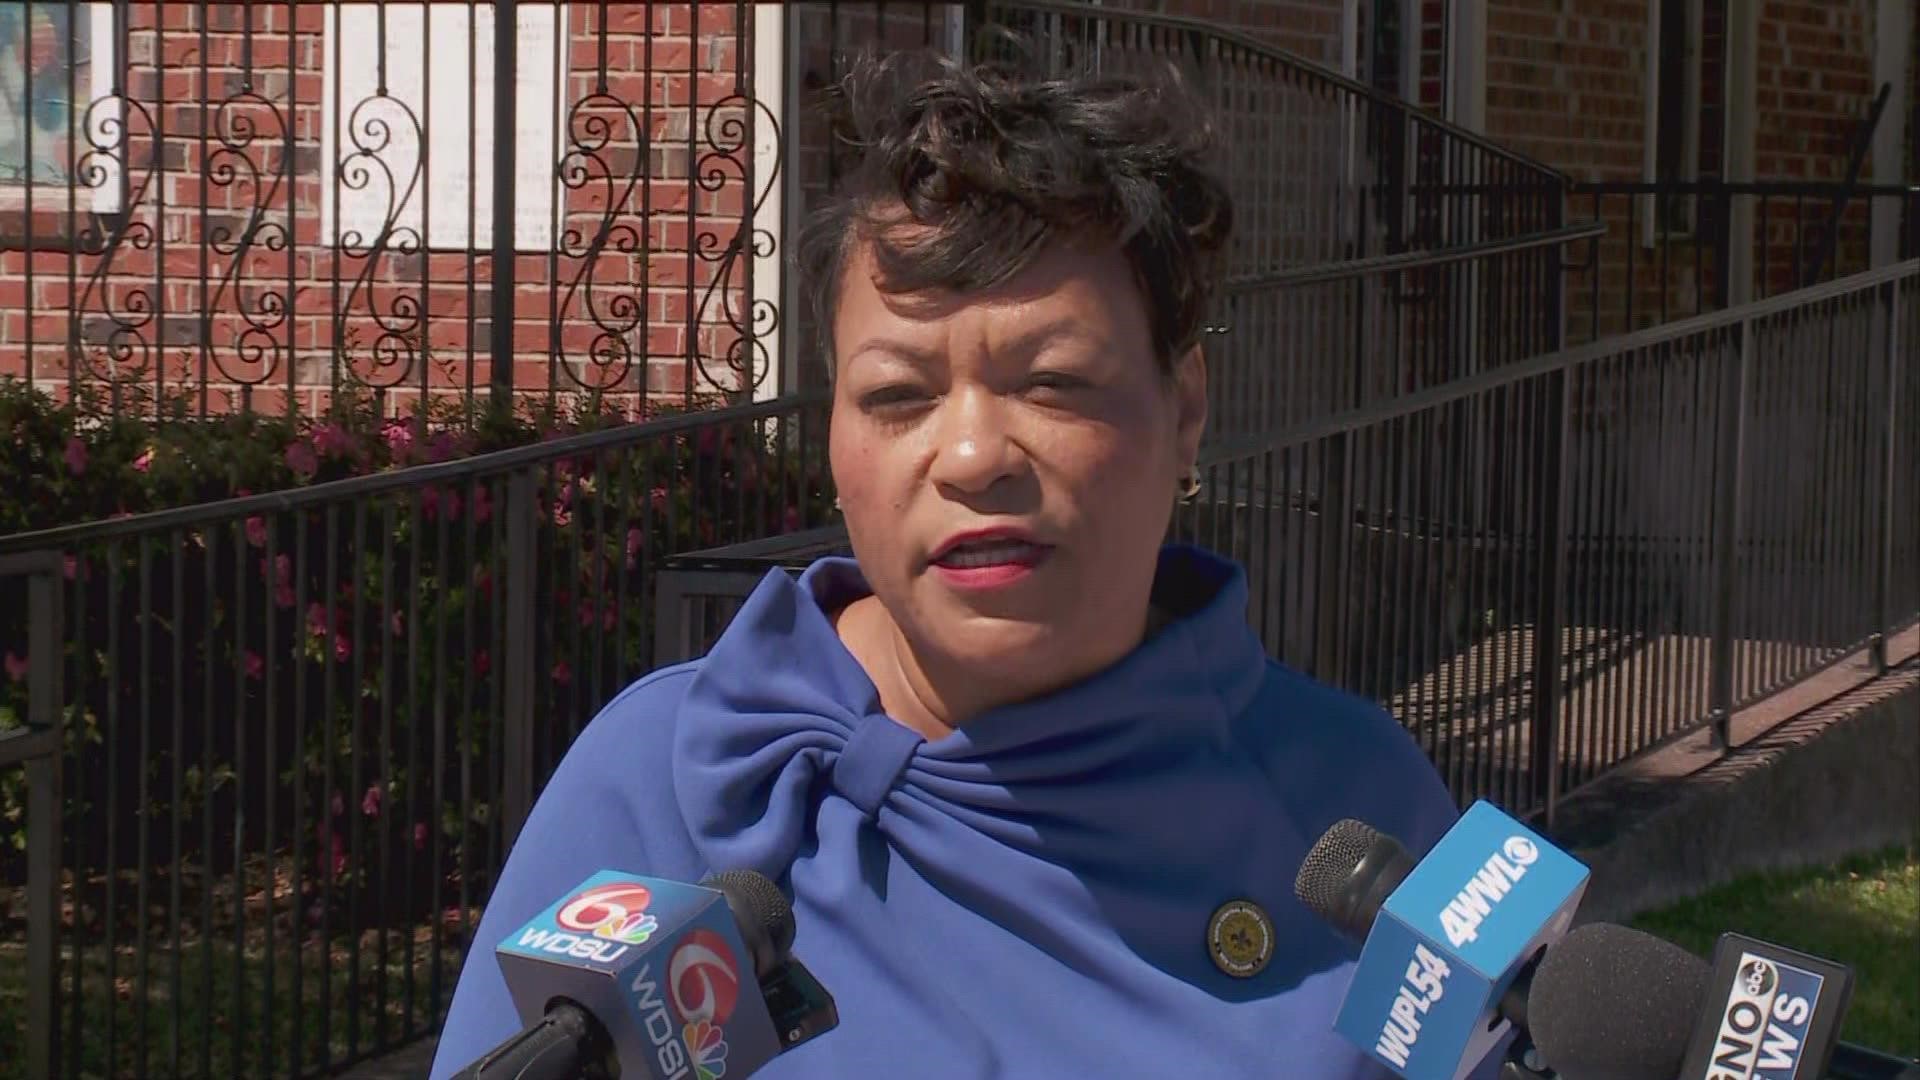 Mayor LaToya Cantrell addressed questions on the city's rising murder rate, her travel and questions around it and more topics Tuesday.